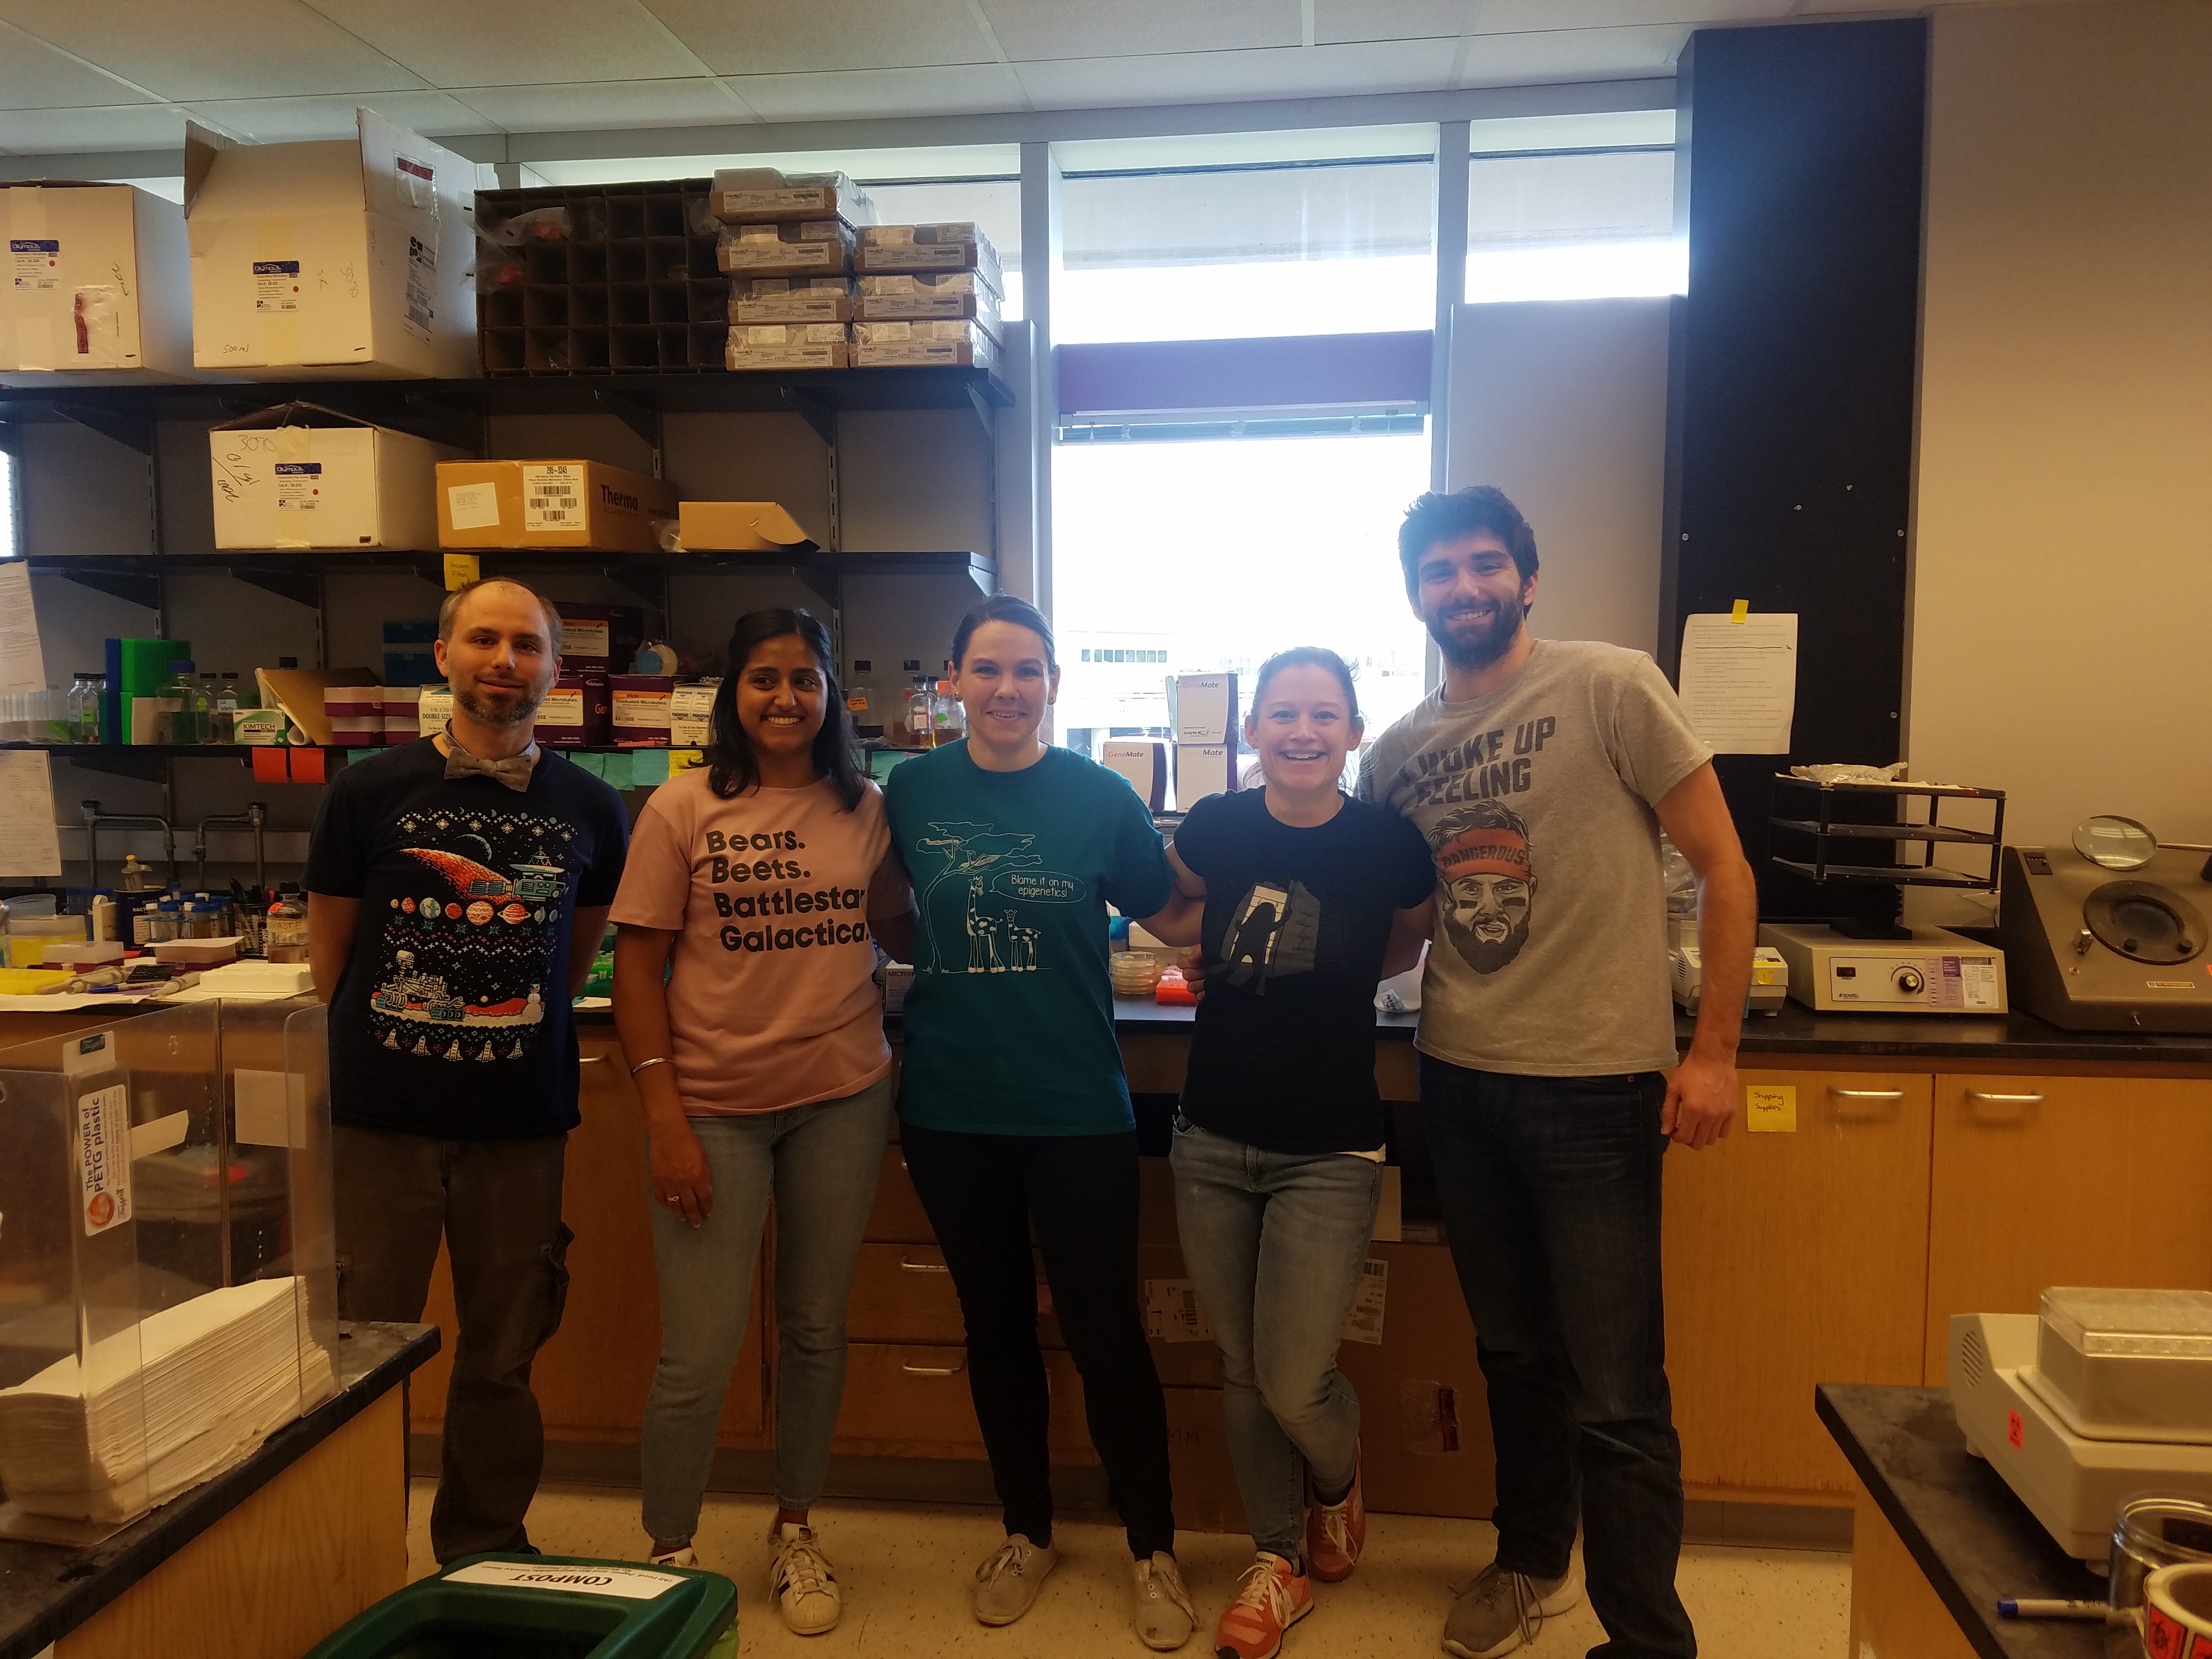 Fun t-shirt day in the lab, 2019